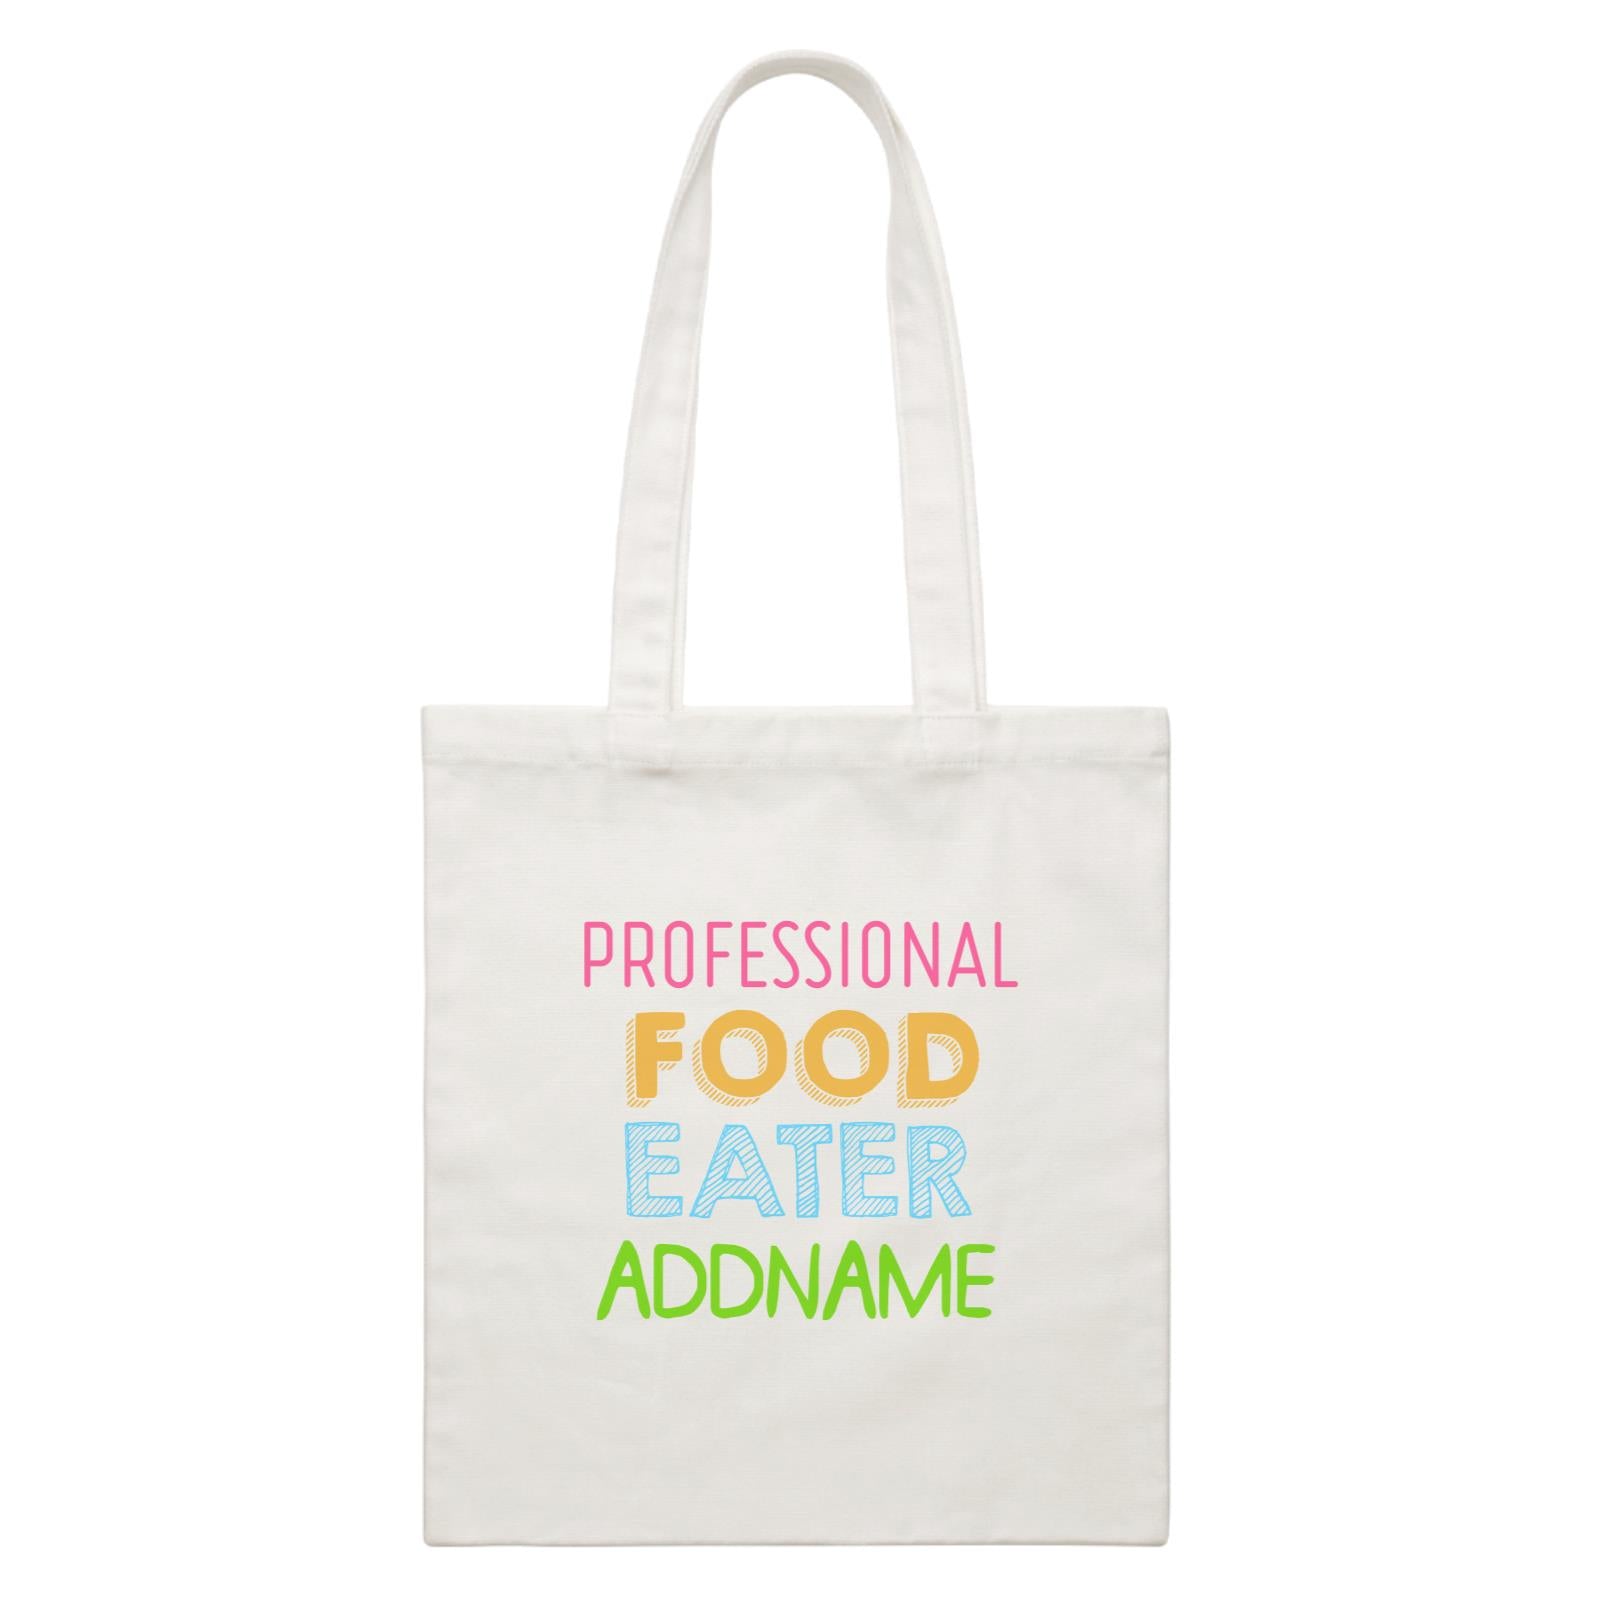 Professional Food Eater Addname White Canvas Bag